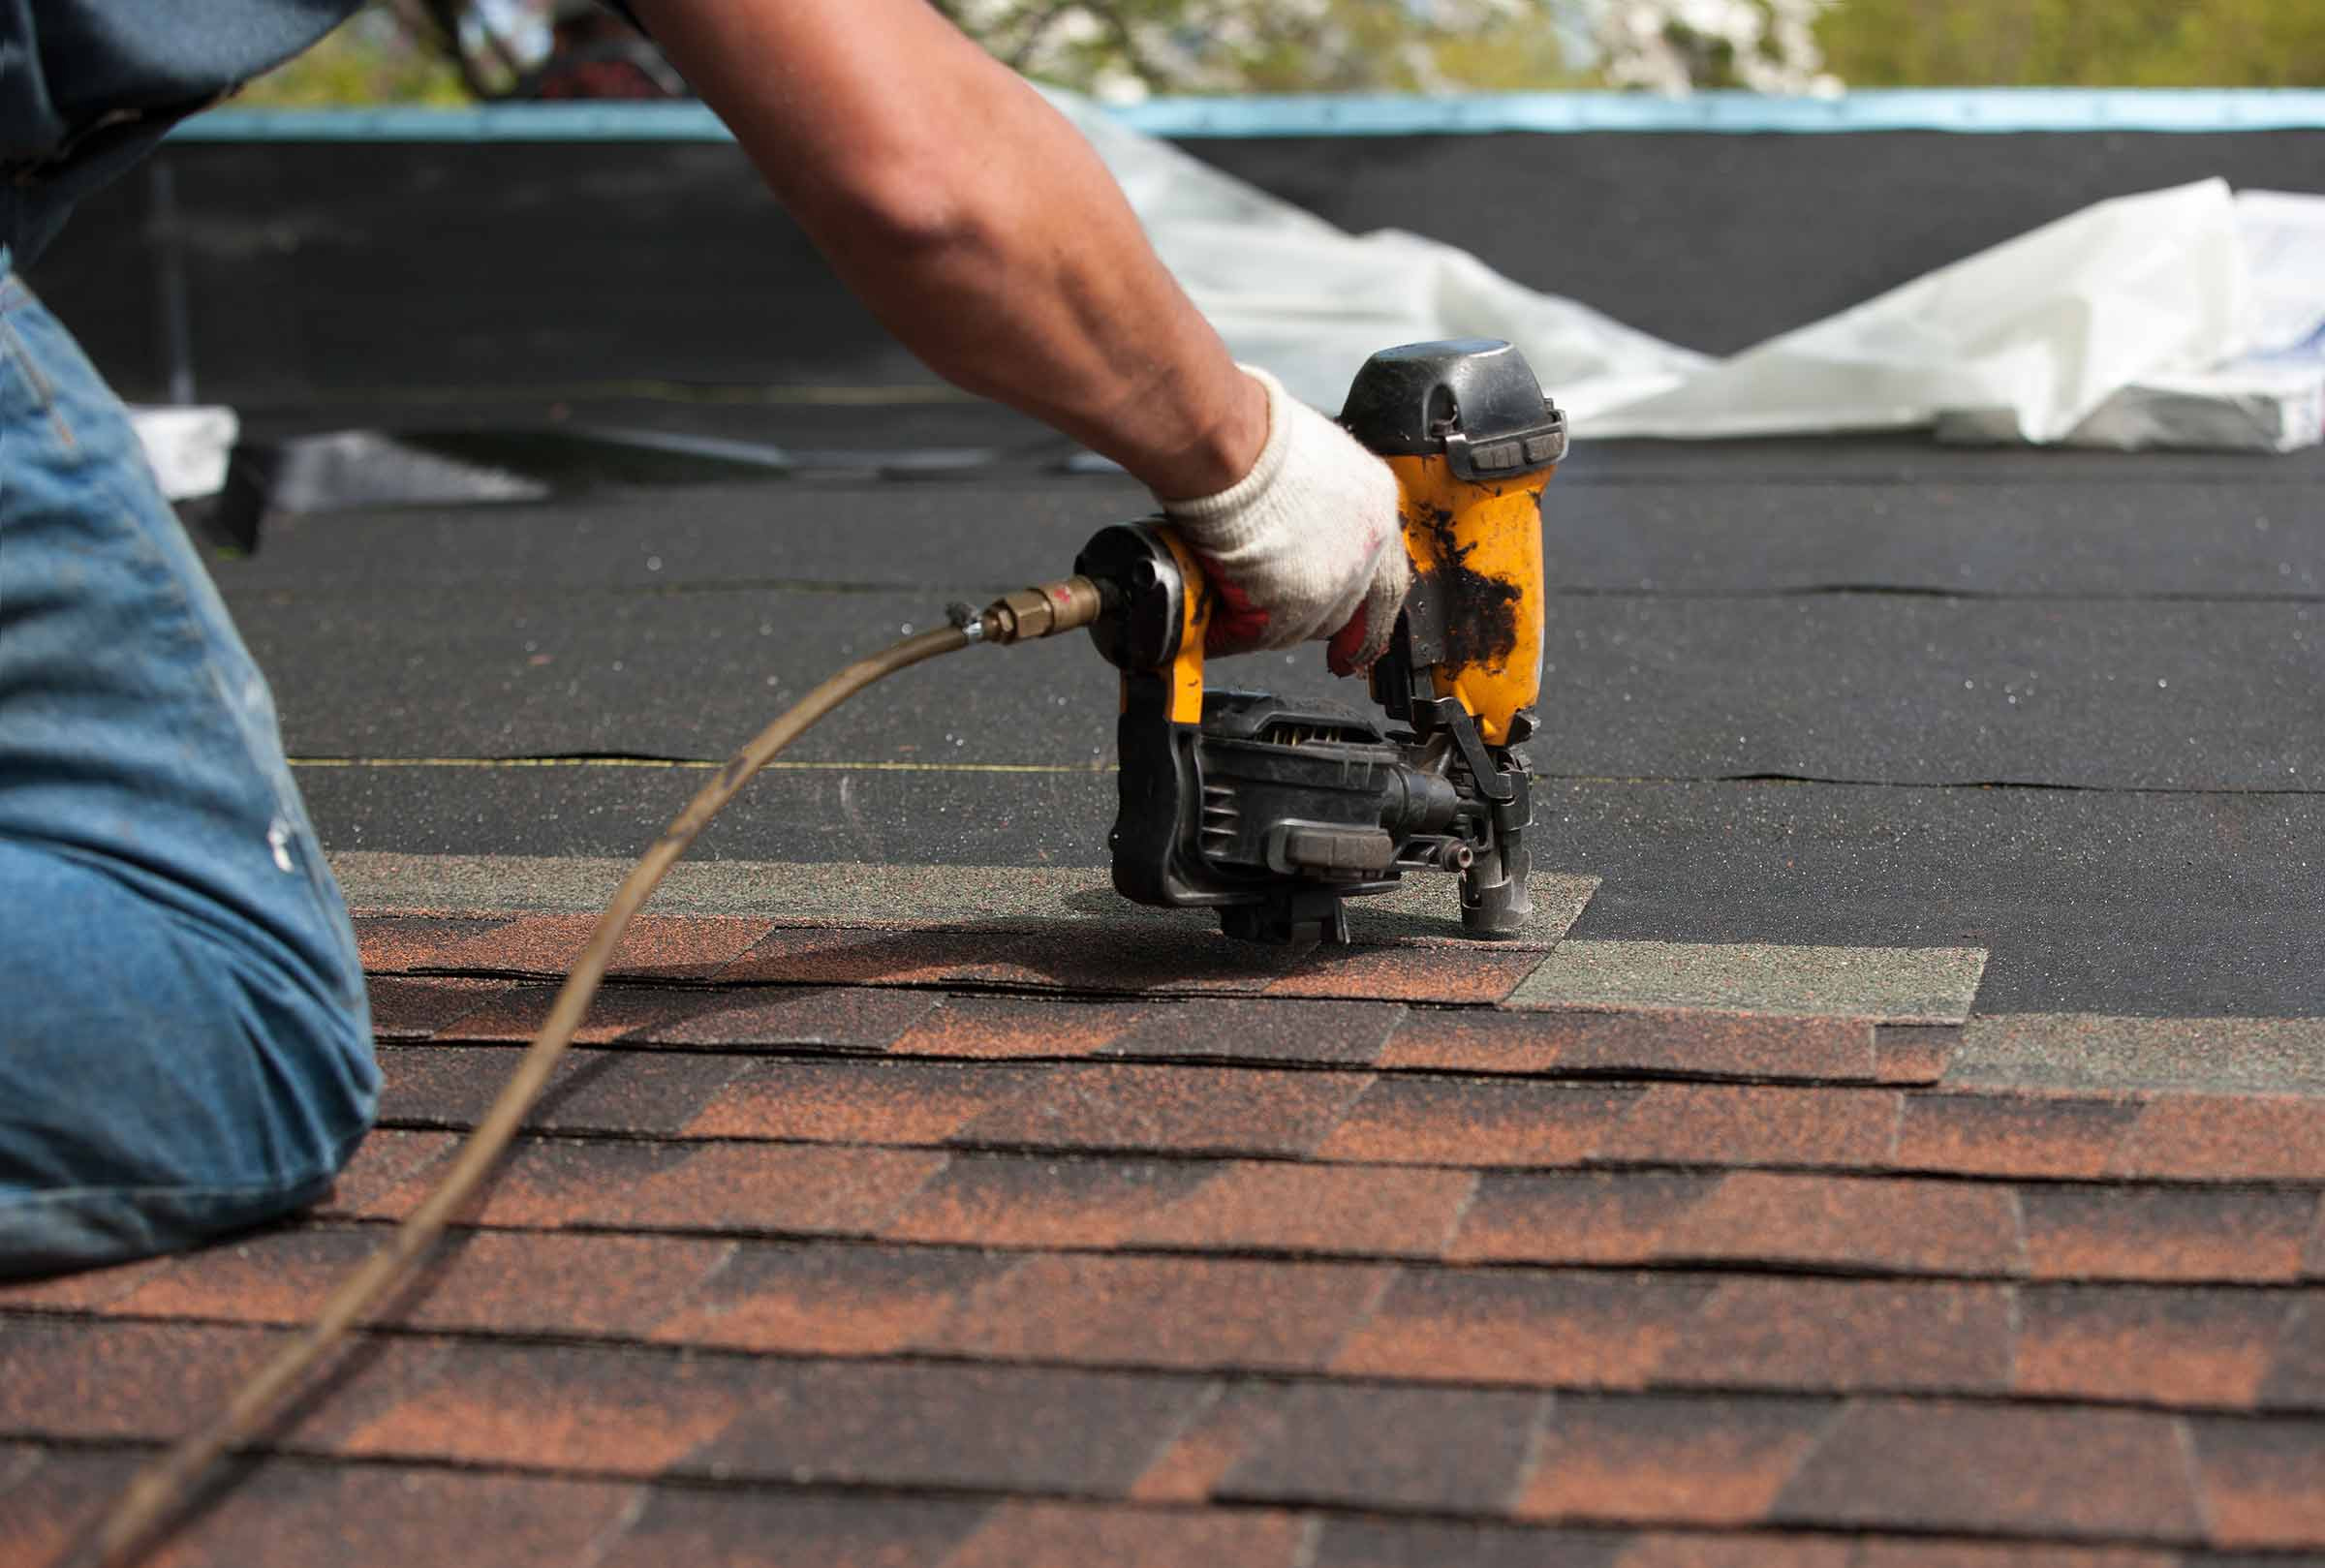 Roof installers